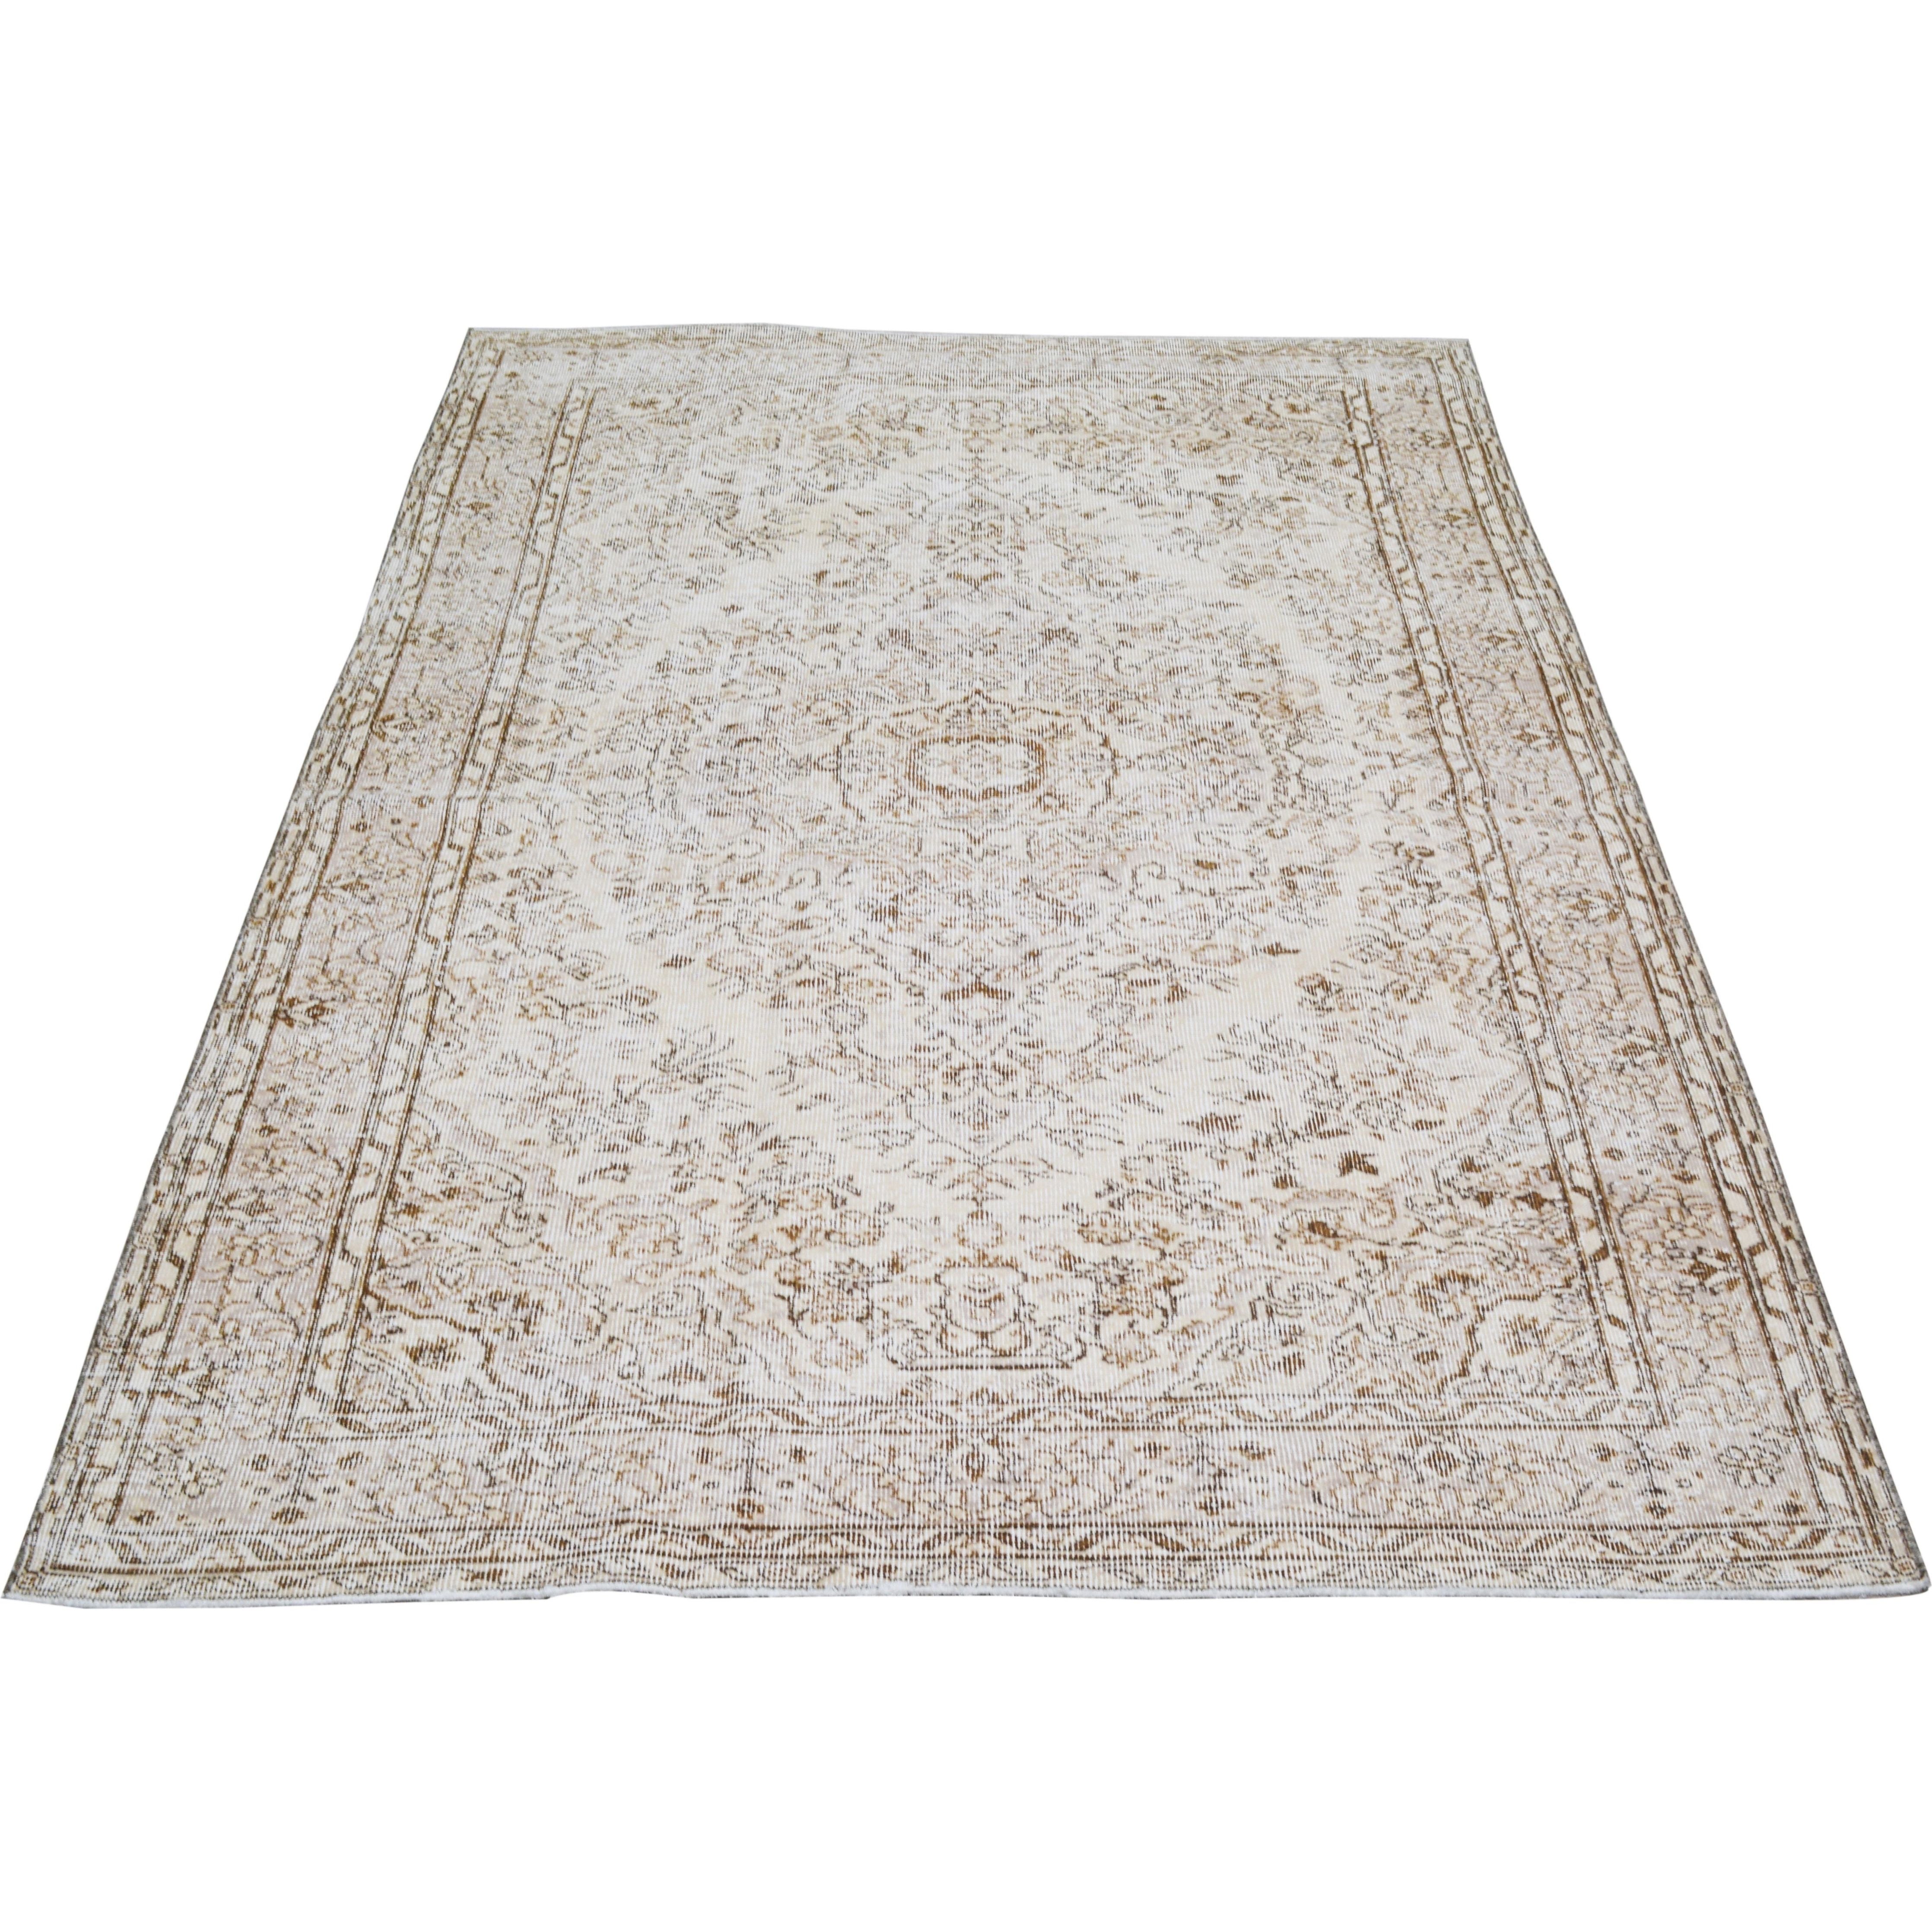 The Vintage Cheval Rug features beautiful design of the old traditional layout. This rug is easy to maintain and clean because of it’s very little shedding. A perfect rug for your entryway, living and other space. Amethyst Home provides interior design services, furniture, rugs, and lighting in the Omaha metro area.